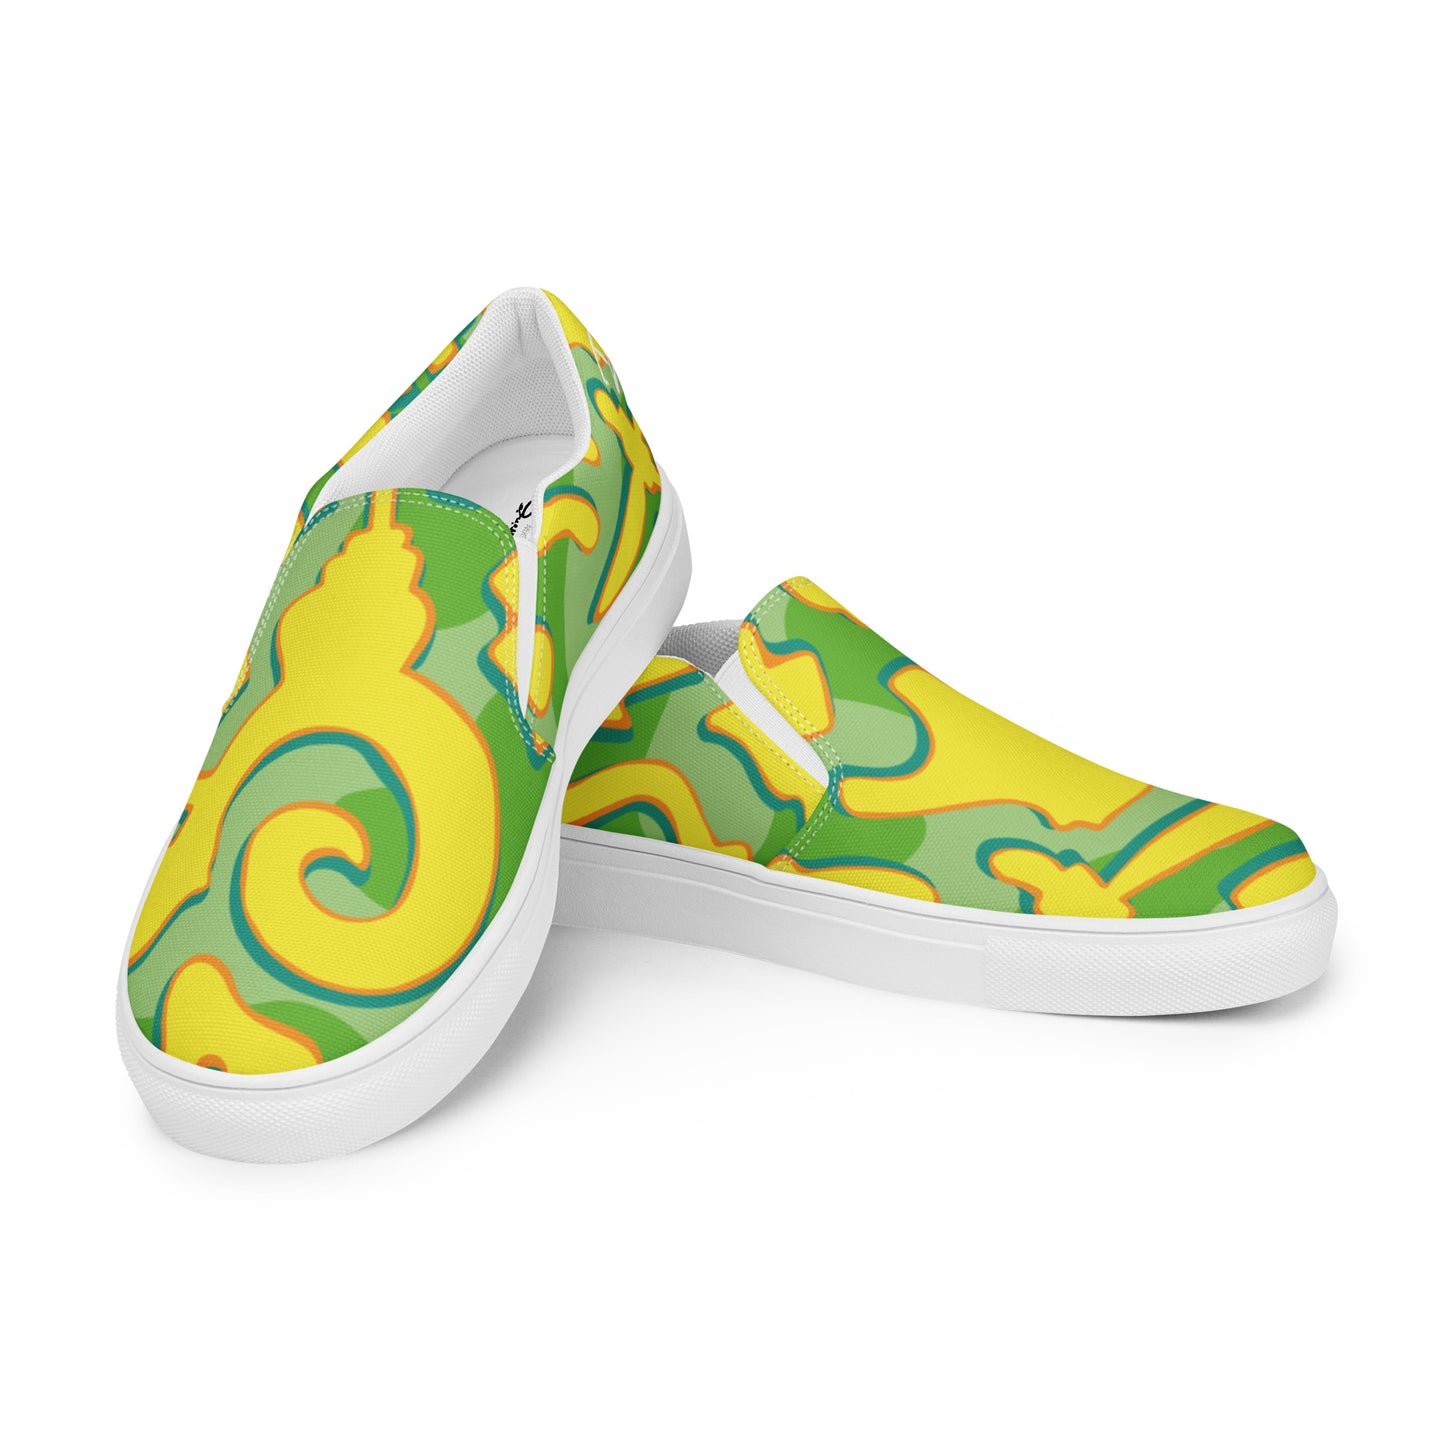 BLIMEY LIMEY by DOLVING - Men’s slip-on canvas shoes